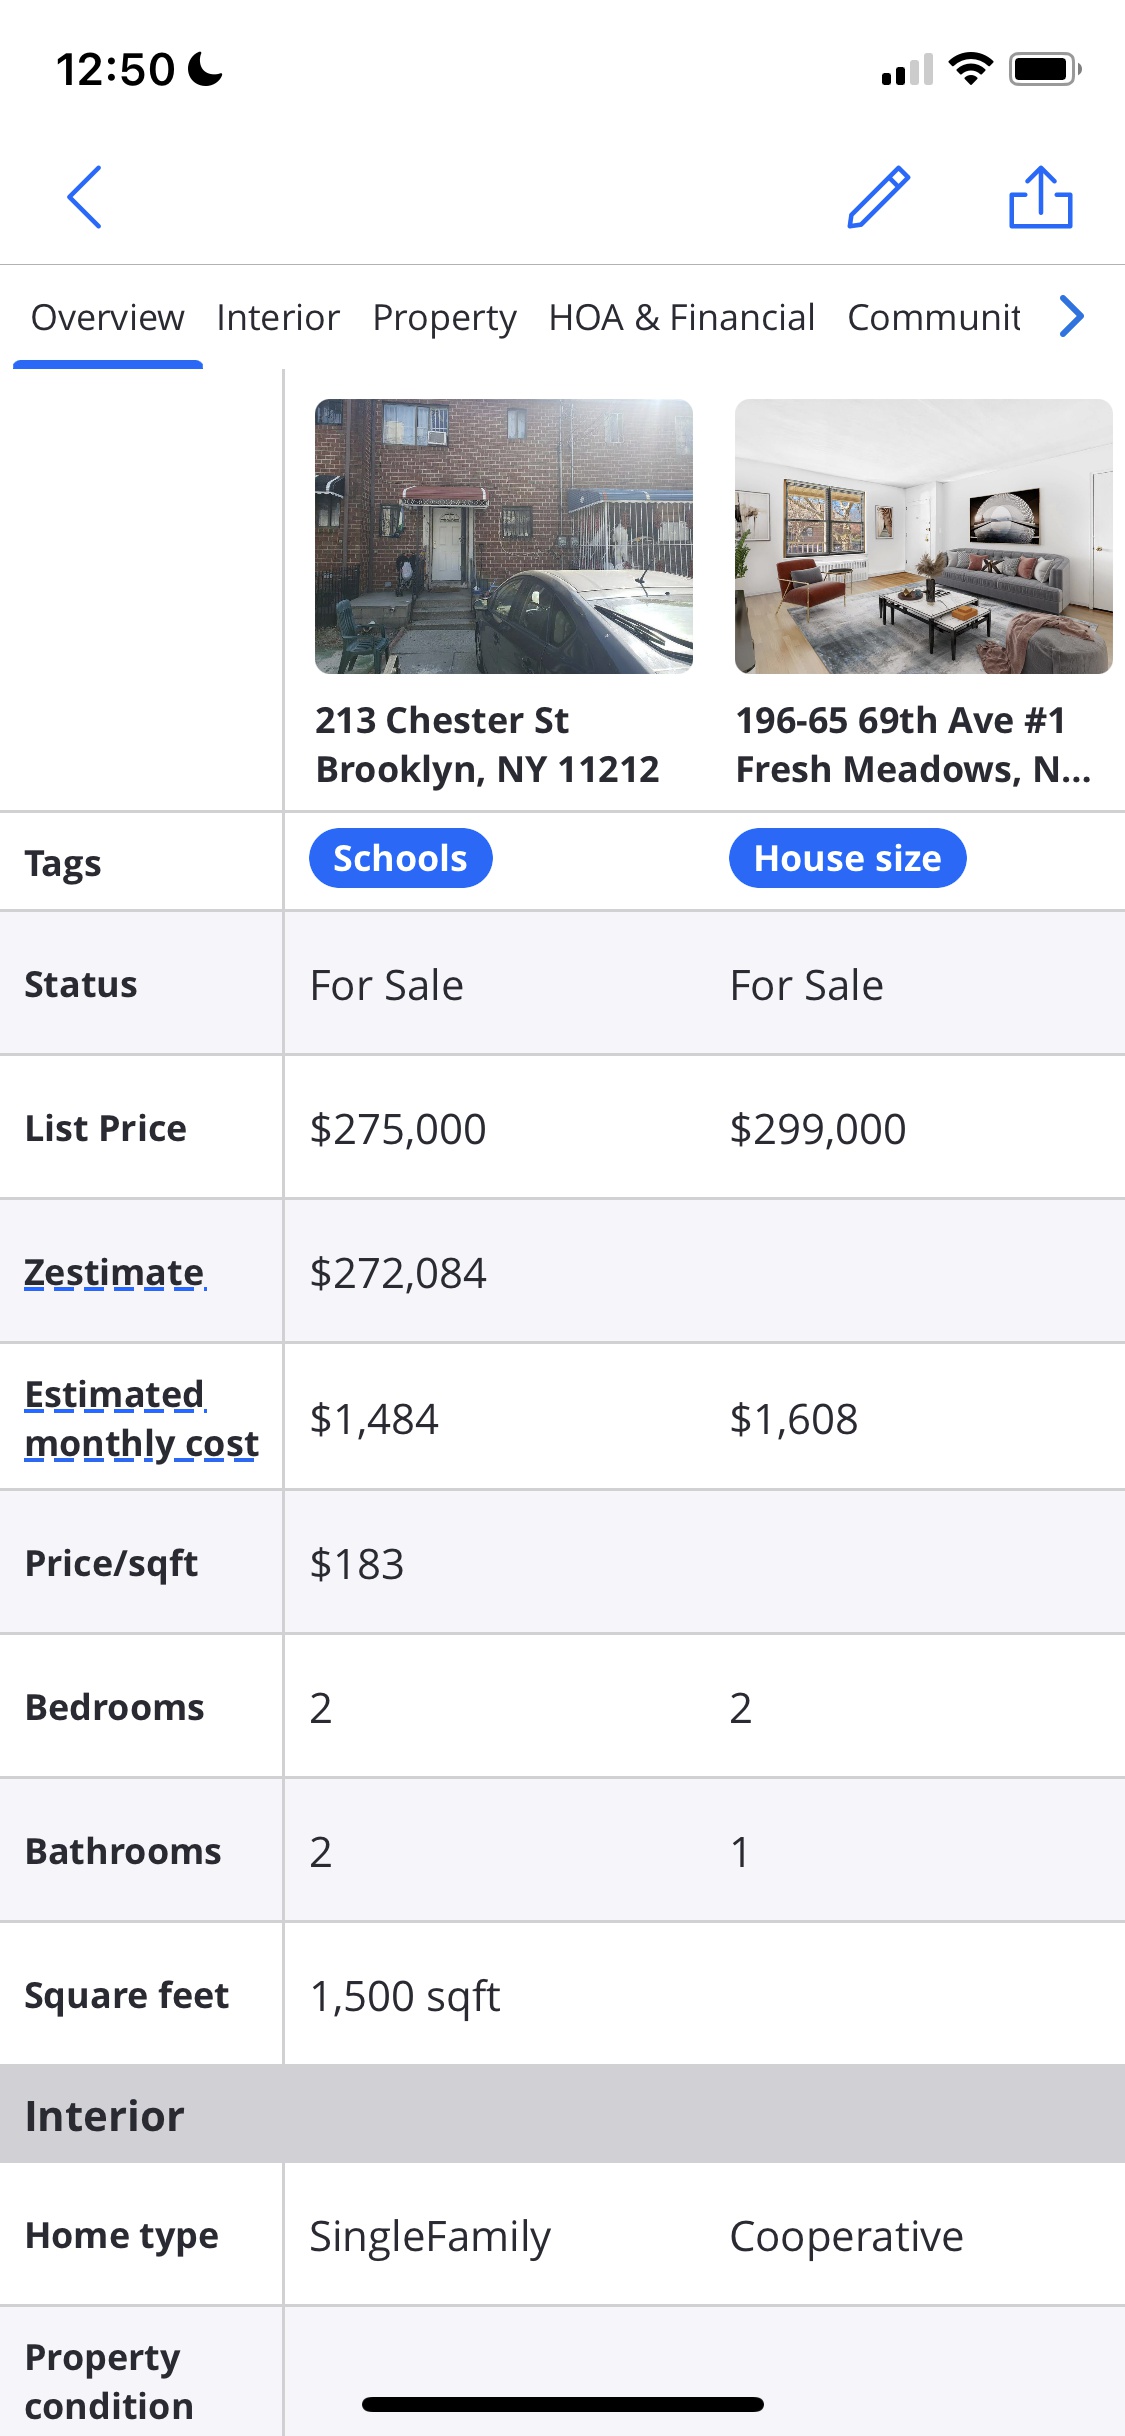 Screenshot of Zillow - Compare